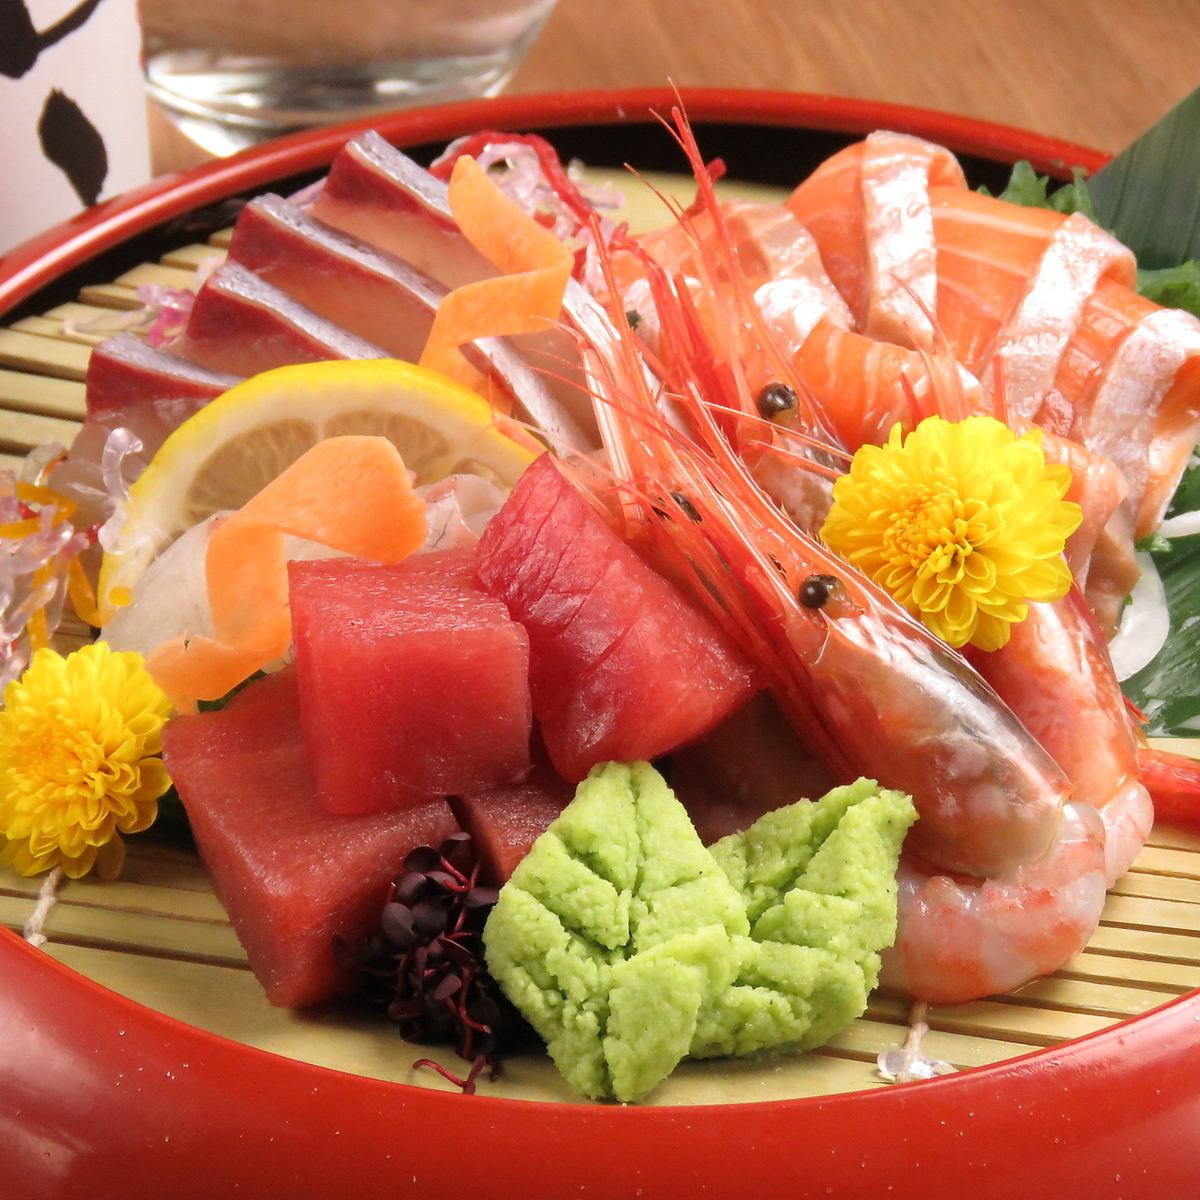 Enjoy fresh fish shipped directly from the production area or purchased from the market with sashimi, fried food, and hand-rolled sushi.